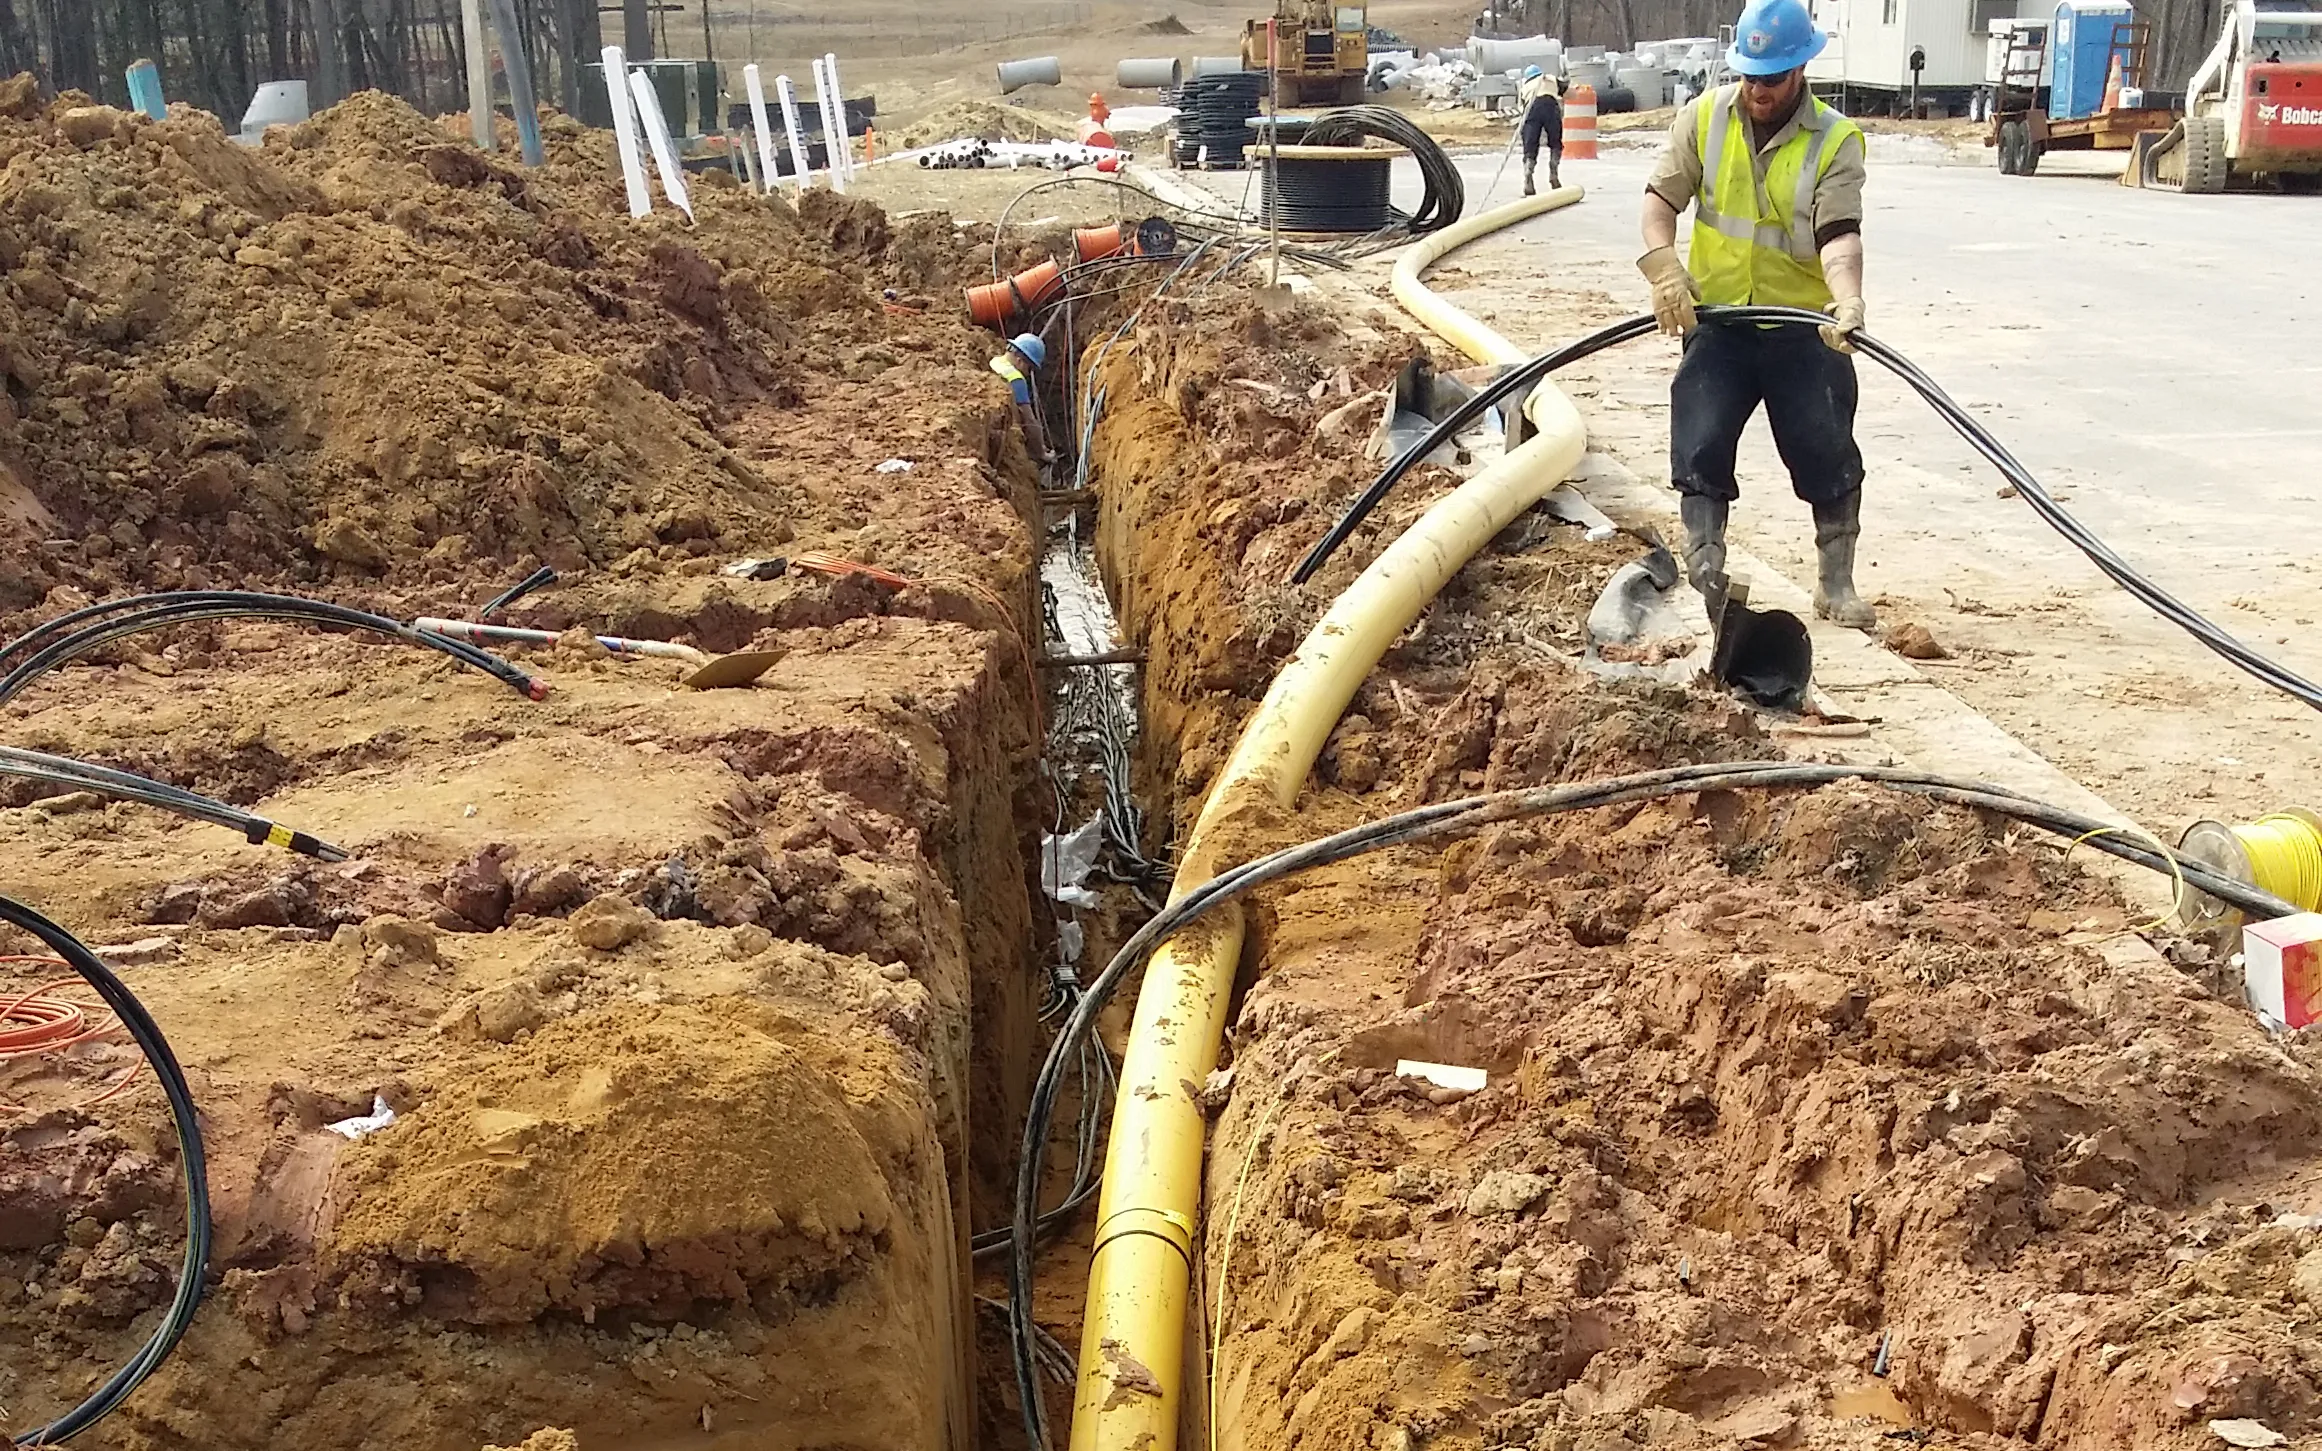 Worker putting electrical piping into trench